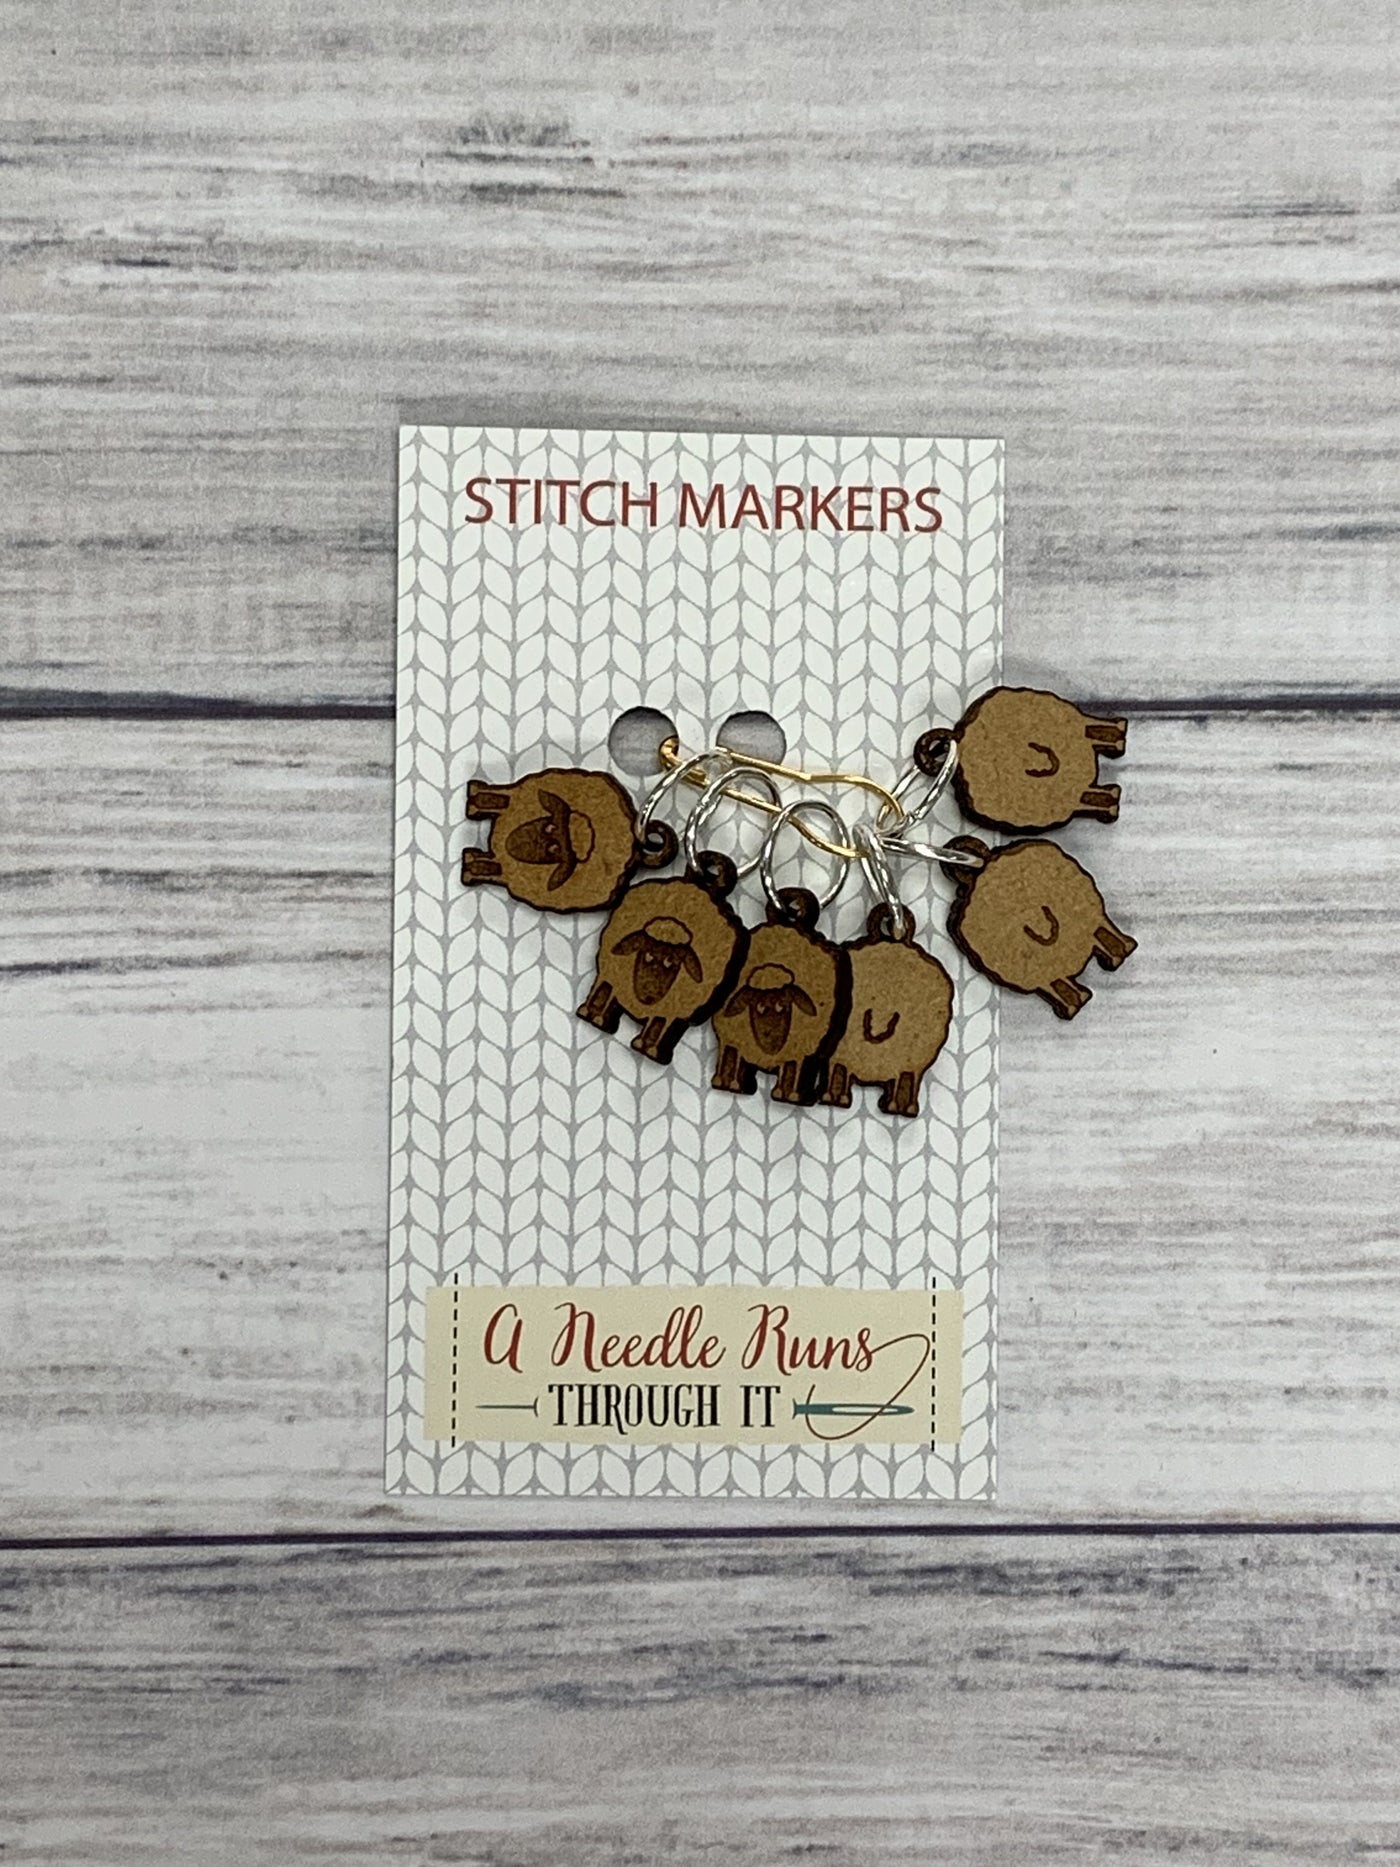 Wooden Ring Stitch Markers by A Needle Runs Though It - Close Up - FYN